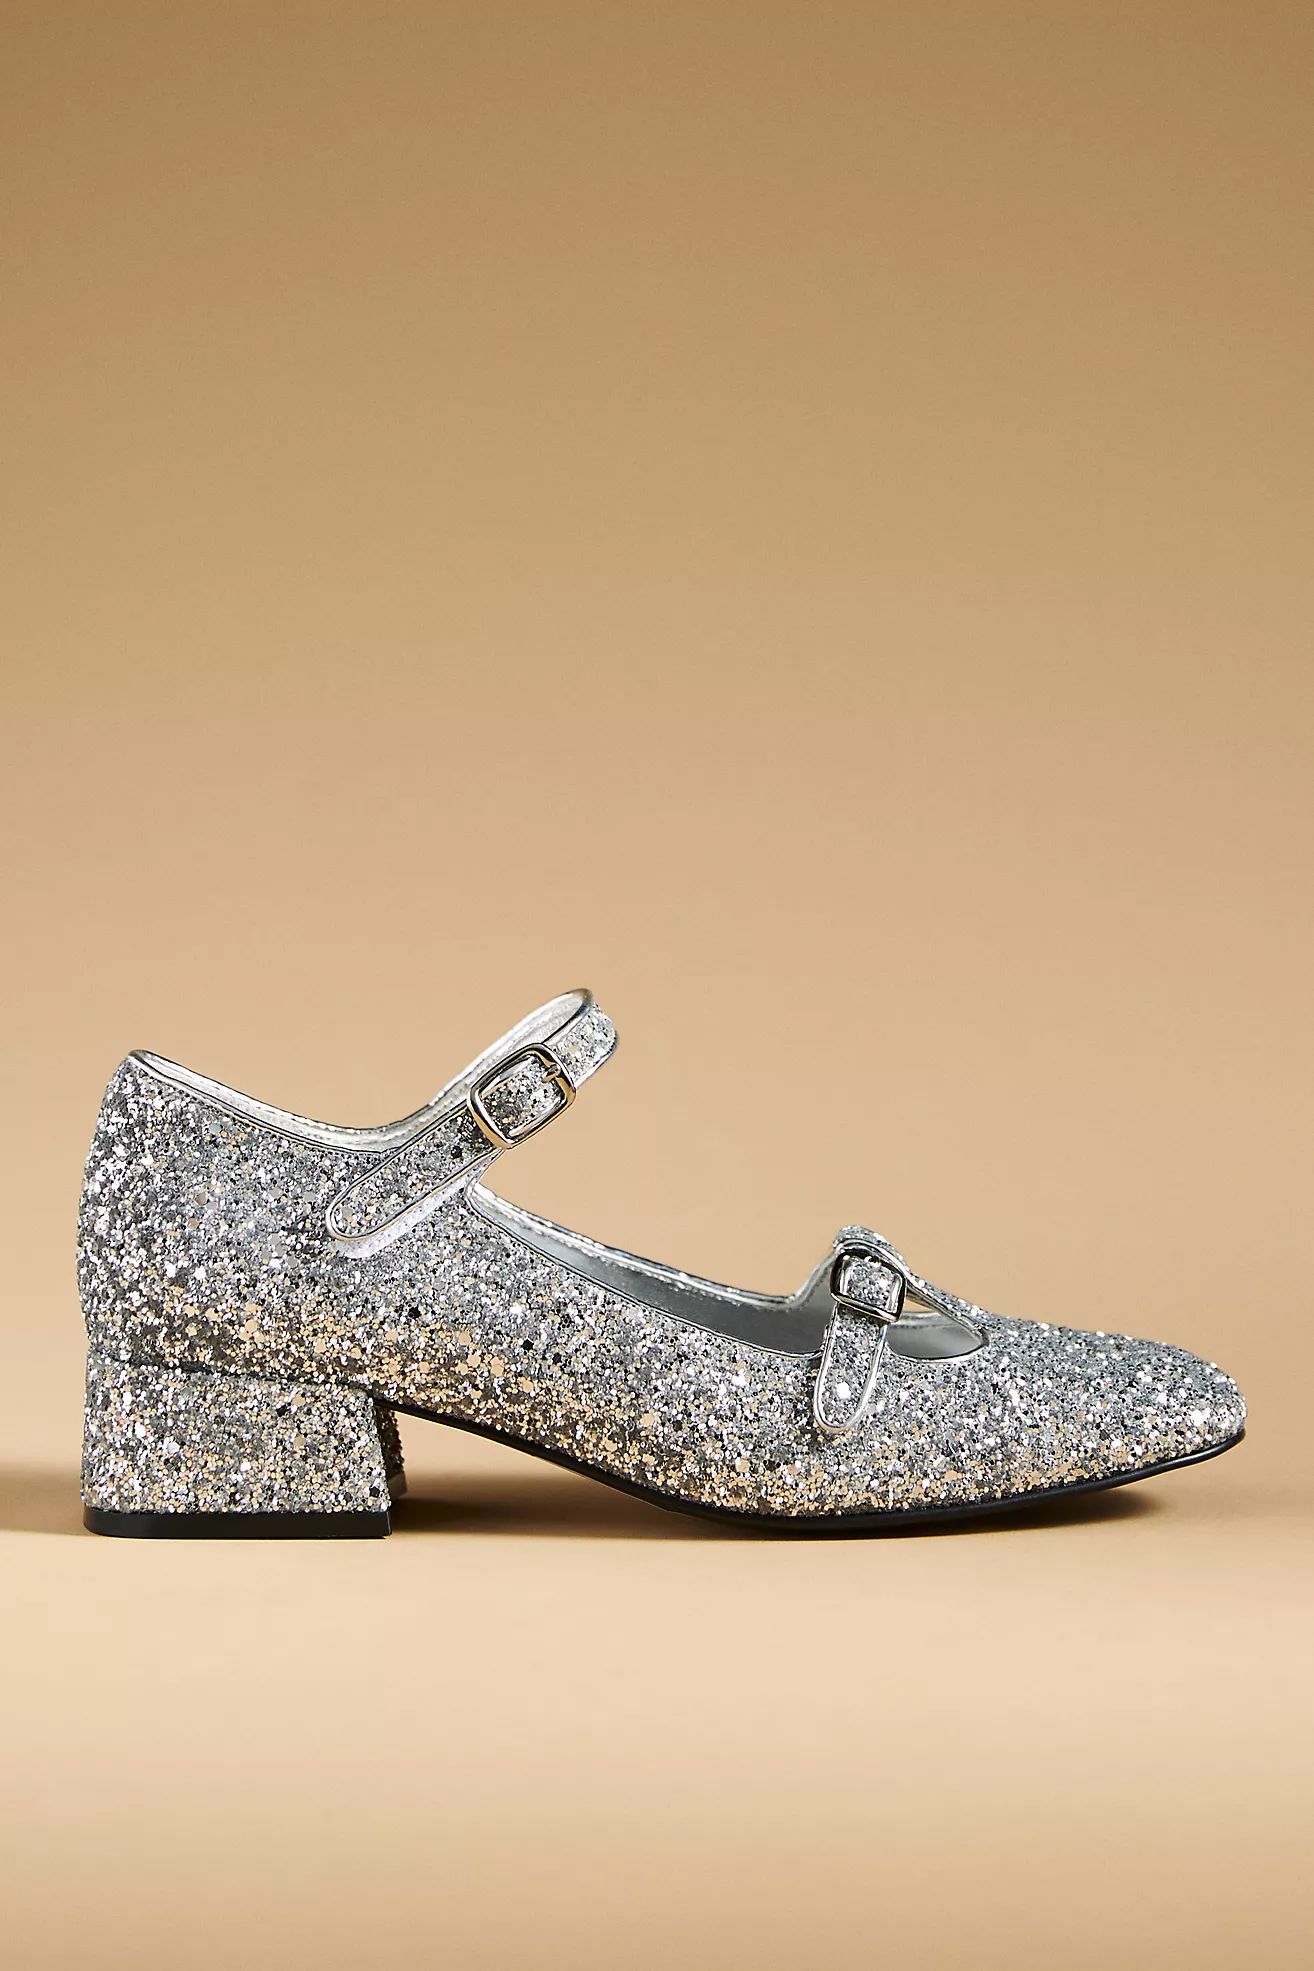 Jeffrey Campbell Musical Mary Jane Pumps | Anthropologie (US)